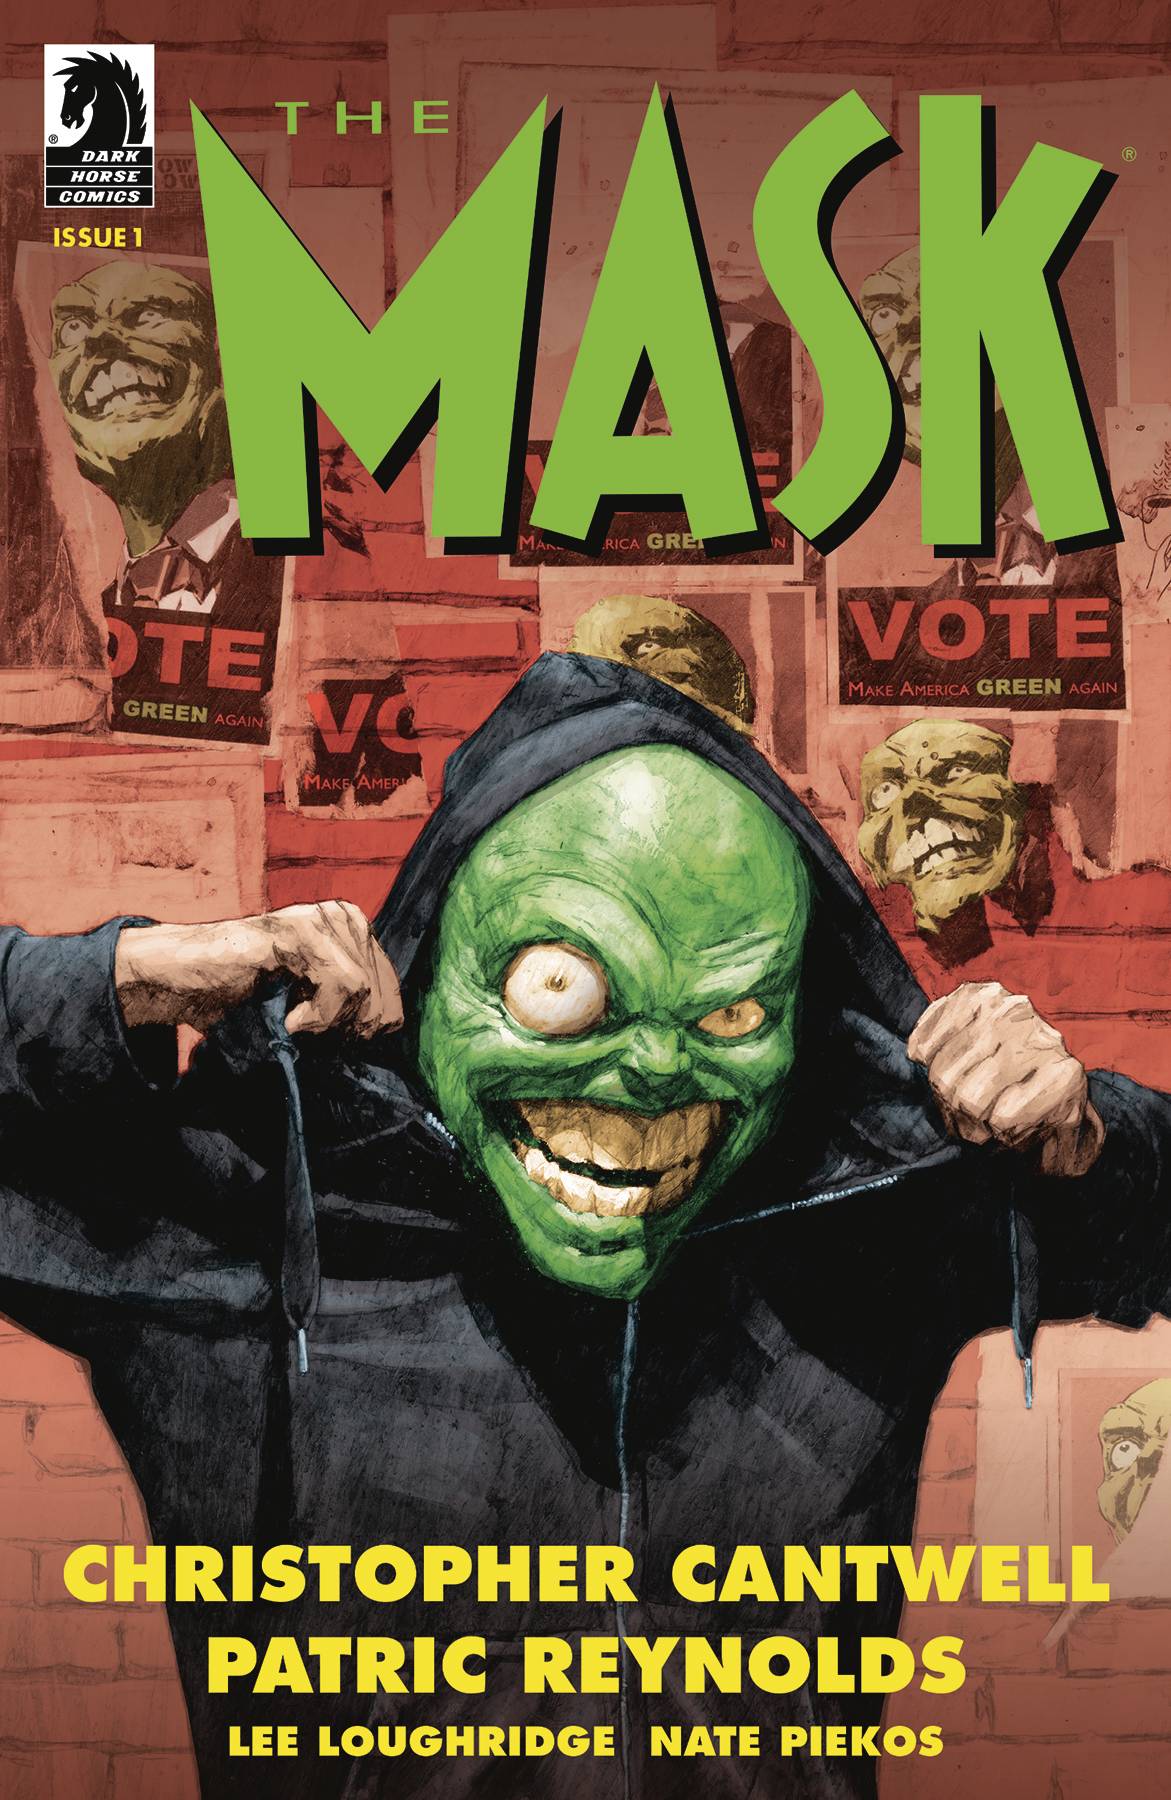 The Mask: I Pledge Allegiance To The Mask #1 (2019)